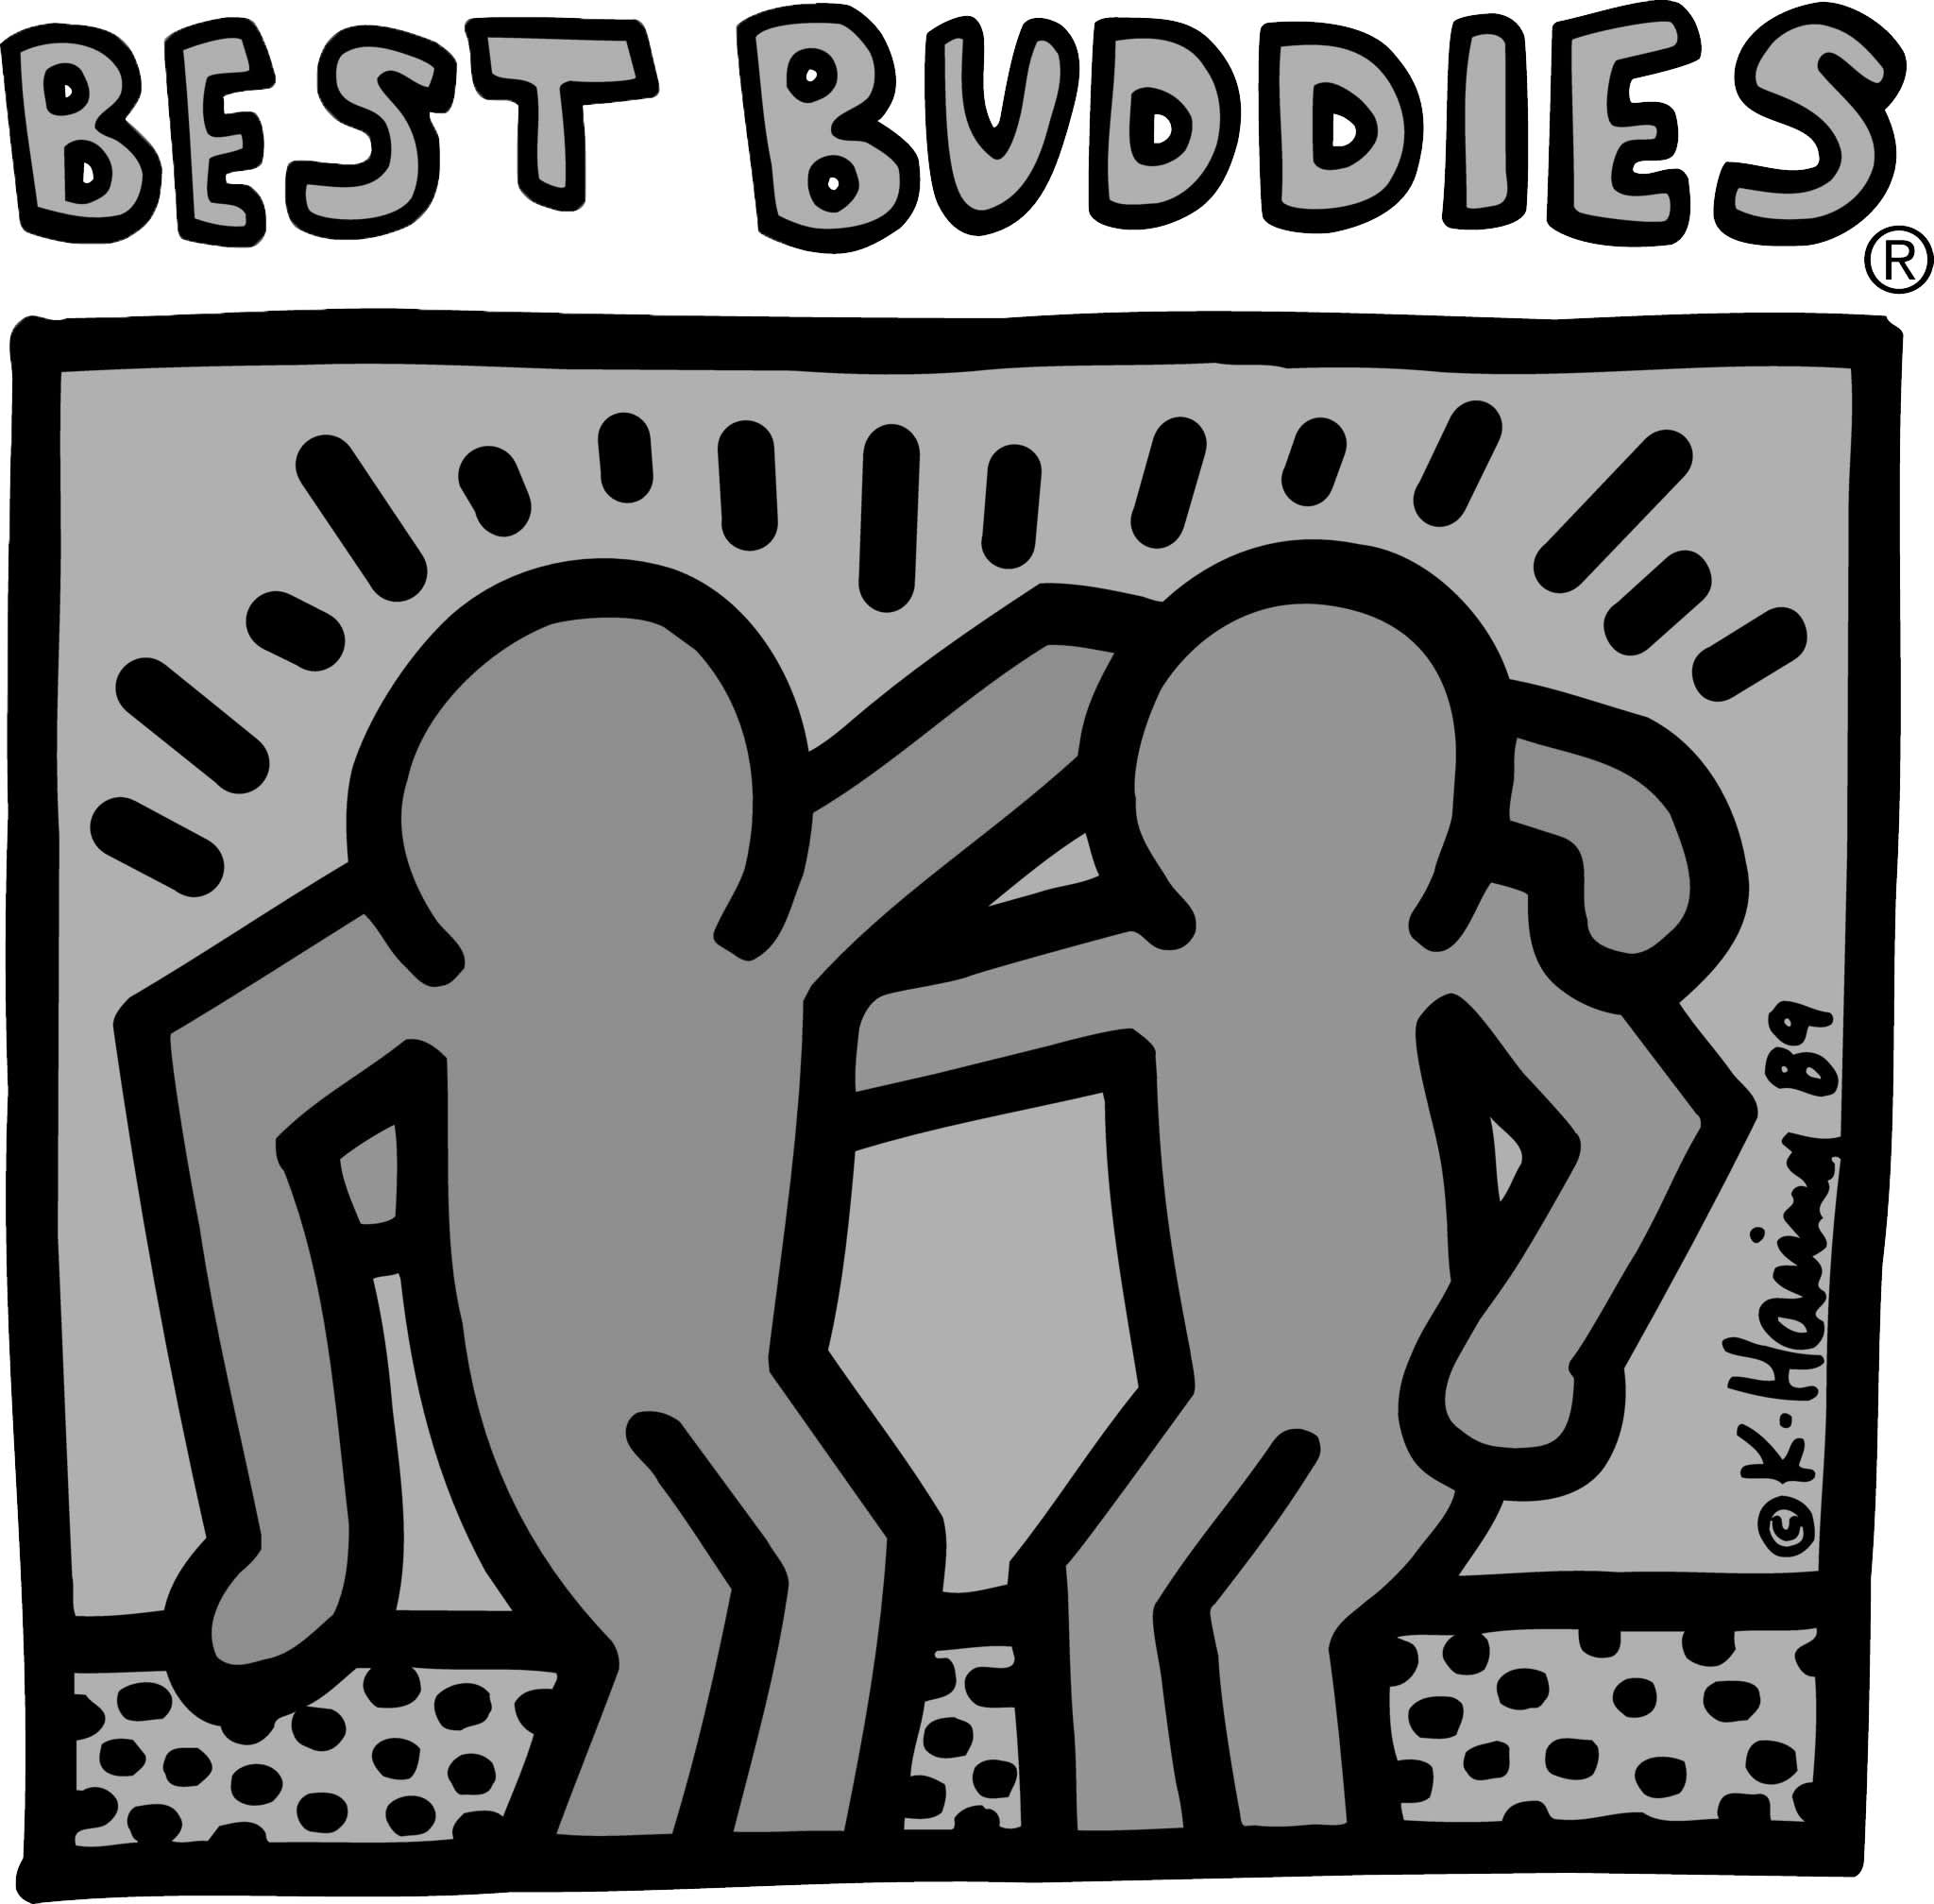 Best Buddies Magical Dining 2018 Charity logo